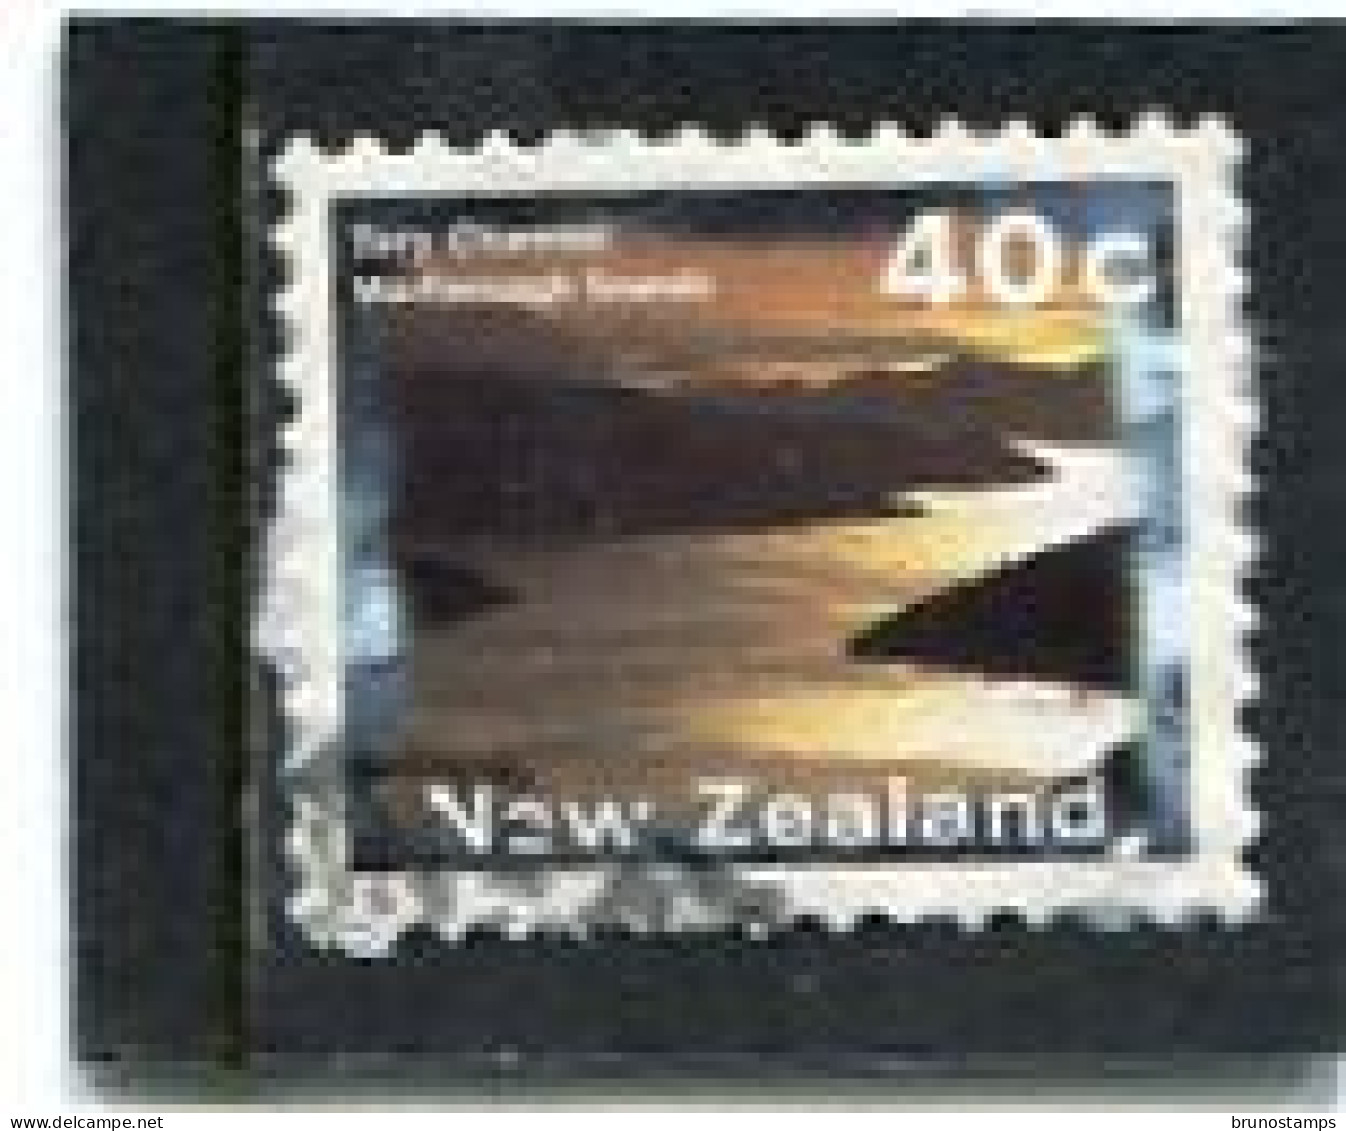 NEW ZEALAND - 2004  40c  TORY CHANNEL  SELF ADHESIVE  FINE  USED - Used Stamps